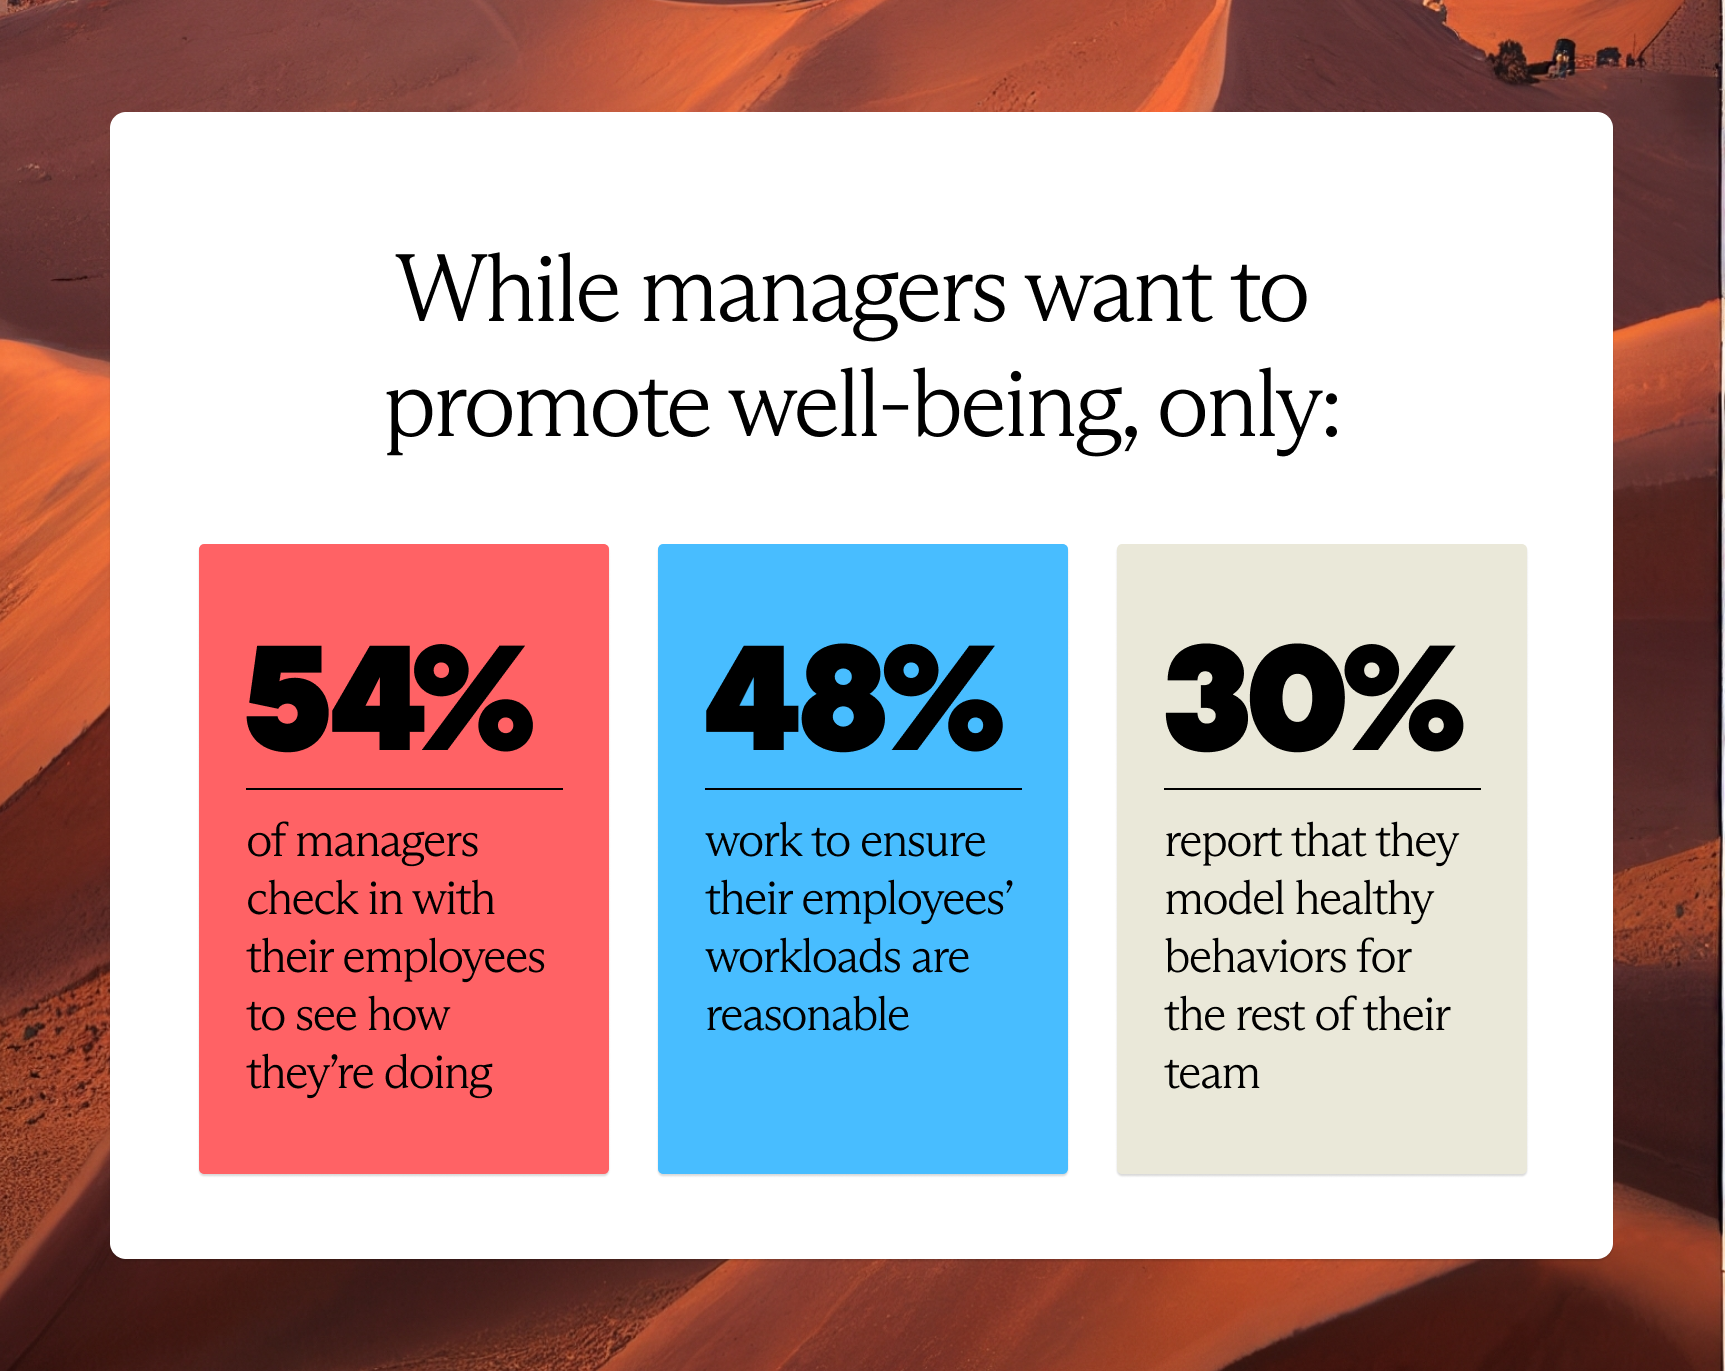 While managers want to promote well-being, only a small percentage of managers check-in with their employees, work to ensure their employees' workloads are reasonable, and model healthy behaviors for their team